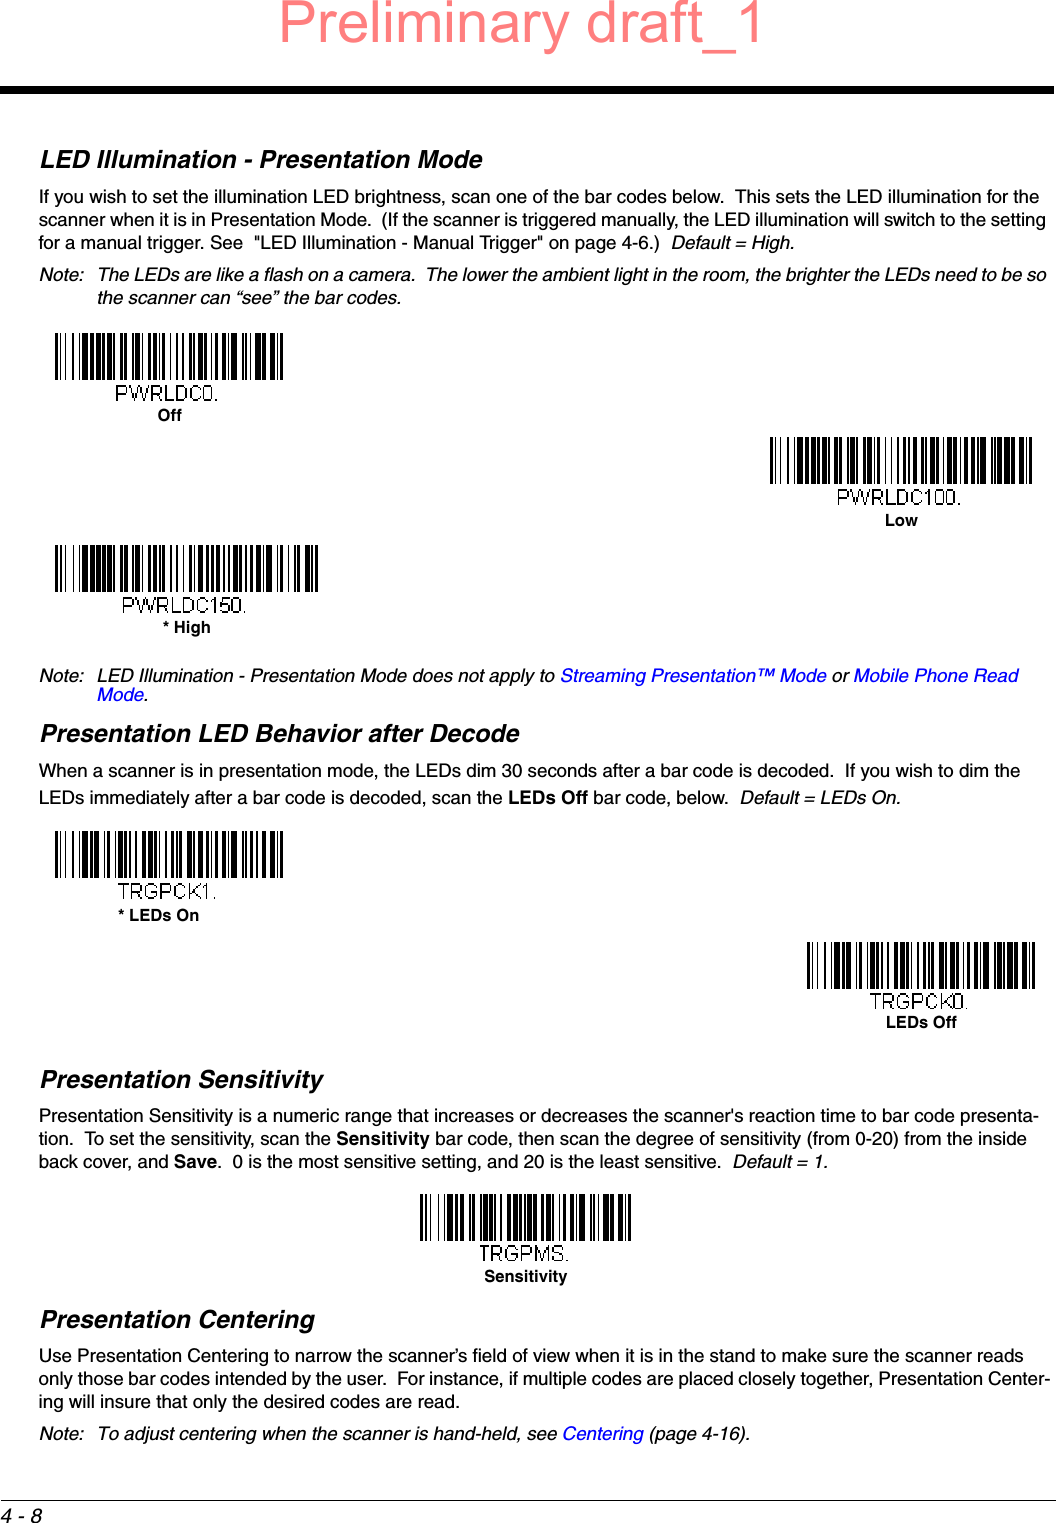 4 - 8LED Illumination - Presentation ModeIf you wish to set the illumination LED brightness, scan one of the bar codes below.  This sets the LED illumination for the scanner when it is in Presentation Mode.  (If the scanner is triggered manually, the LED illumination will switch to the setting for a manual trigger. See  &quot;LED Illumination - Manual Trigger&quot; on page 4-6.)  Default = High.Note: The LEDs are like a flash on a camera.  The lower the ambient light in the room, the brighter the LEDs need to be so the scanner can “see” the bar codes. Note: LED Illumination - Presentation Mode does not apply to Streaming Presentation™ Mode or Mobile Phone Read Mode.Presentation LED Behavior after DecodeWhen a scanner is in presentation mode, the LEDs dim 30 seconds after a bar code is decoded.  If you wish to dim the LEDs immediately after a bar code is decoded, scan the LEDs Off bar code, below.  Default = LEDs On.Presentation SensitivityPresentation Sensitivity is a numeric range that increases or decreases the scanner&apos;s reaction time to bar code presenta-tion.  To set the sensitivity, scan the Sensitivity bar code, then scan the degree of sensitivity (from 0-20) from the inside back cover, and Save.  0 is the most sensitive setting, and 20 is the least sensitive.  Default = 1.Presentation CenteringUse Presentation Centering to narrow the scanner’s field of view when it is in the stand to make sure the scanner reads only those bar codes intended by the user.  For instance, if multiple codes are placed closely together, Presentation Center-ing will insure that only the desired codes are read.  Note: To adjust centering when the scanner is hand-held, see Centering (page 4-16).OffLow* High* LEDs OnLEDs OffSensitivityPreliminary draft_1